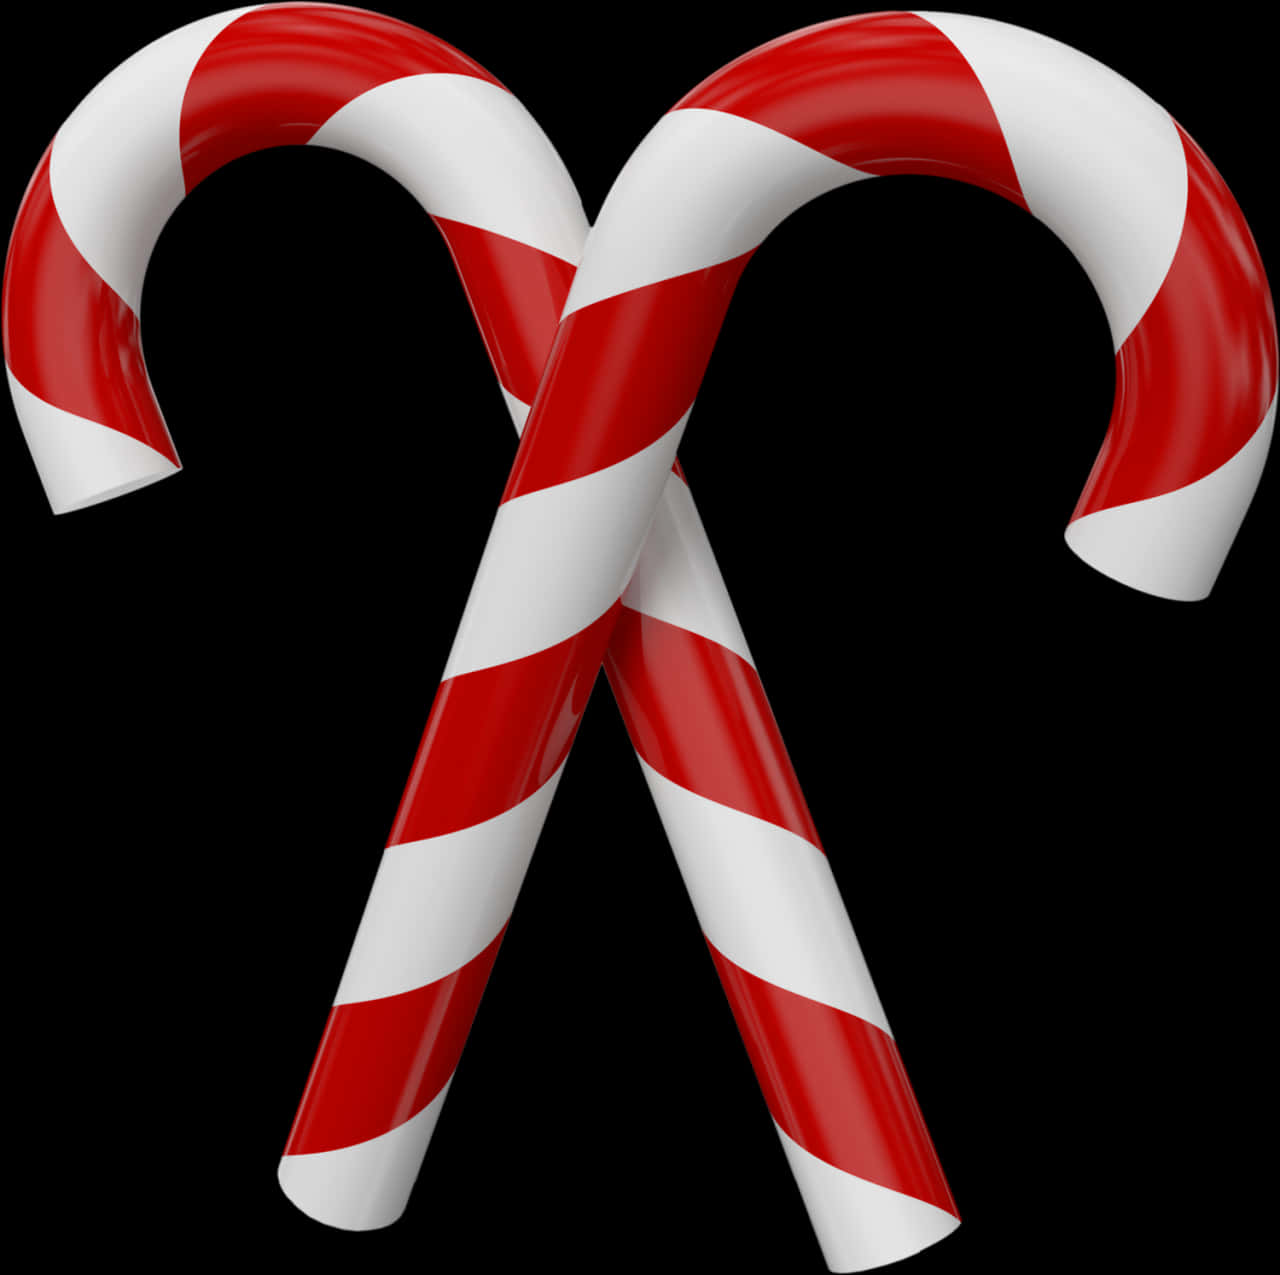 Redand White Candy Canes Crossed PNG